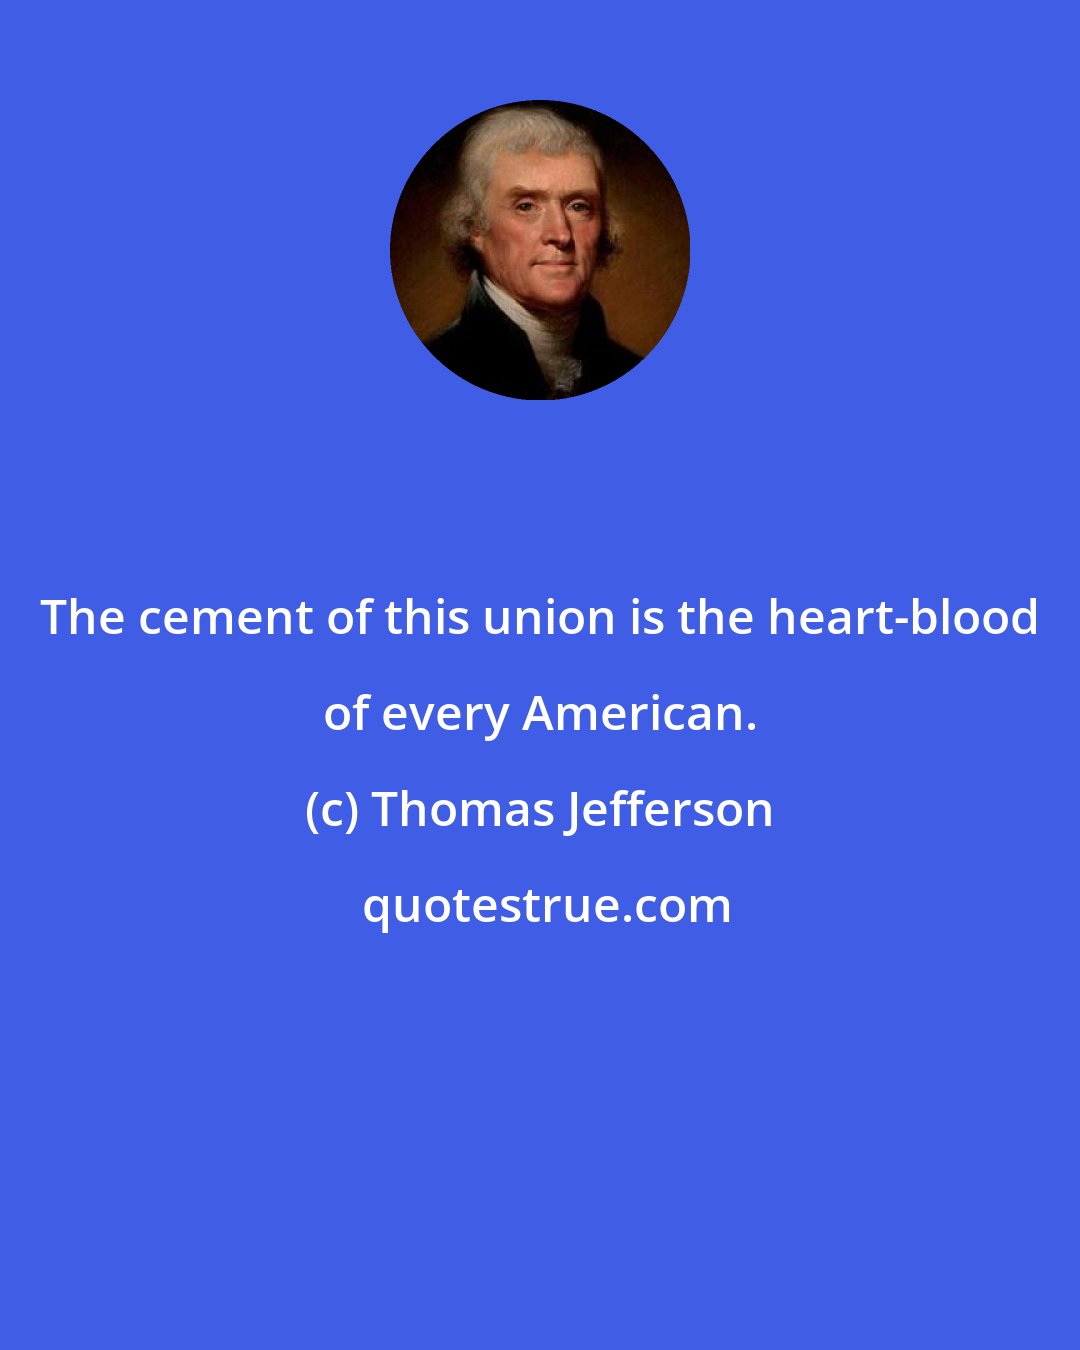 Thomas Jefferson: The cement of this union is the heart-blood of every American.